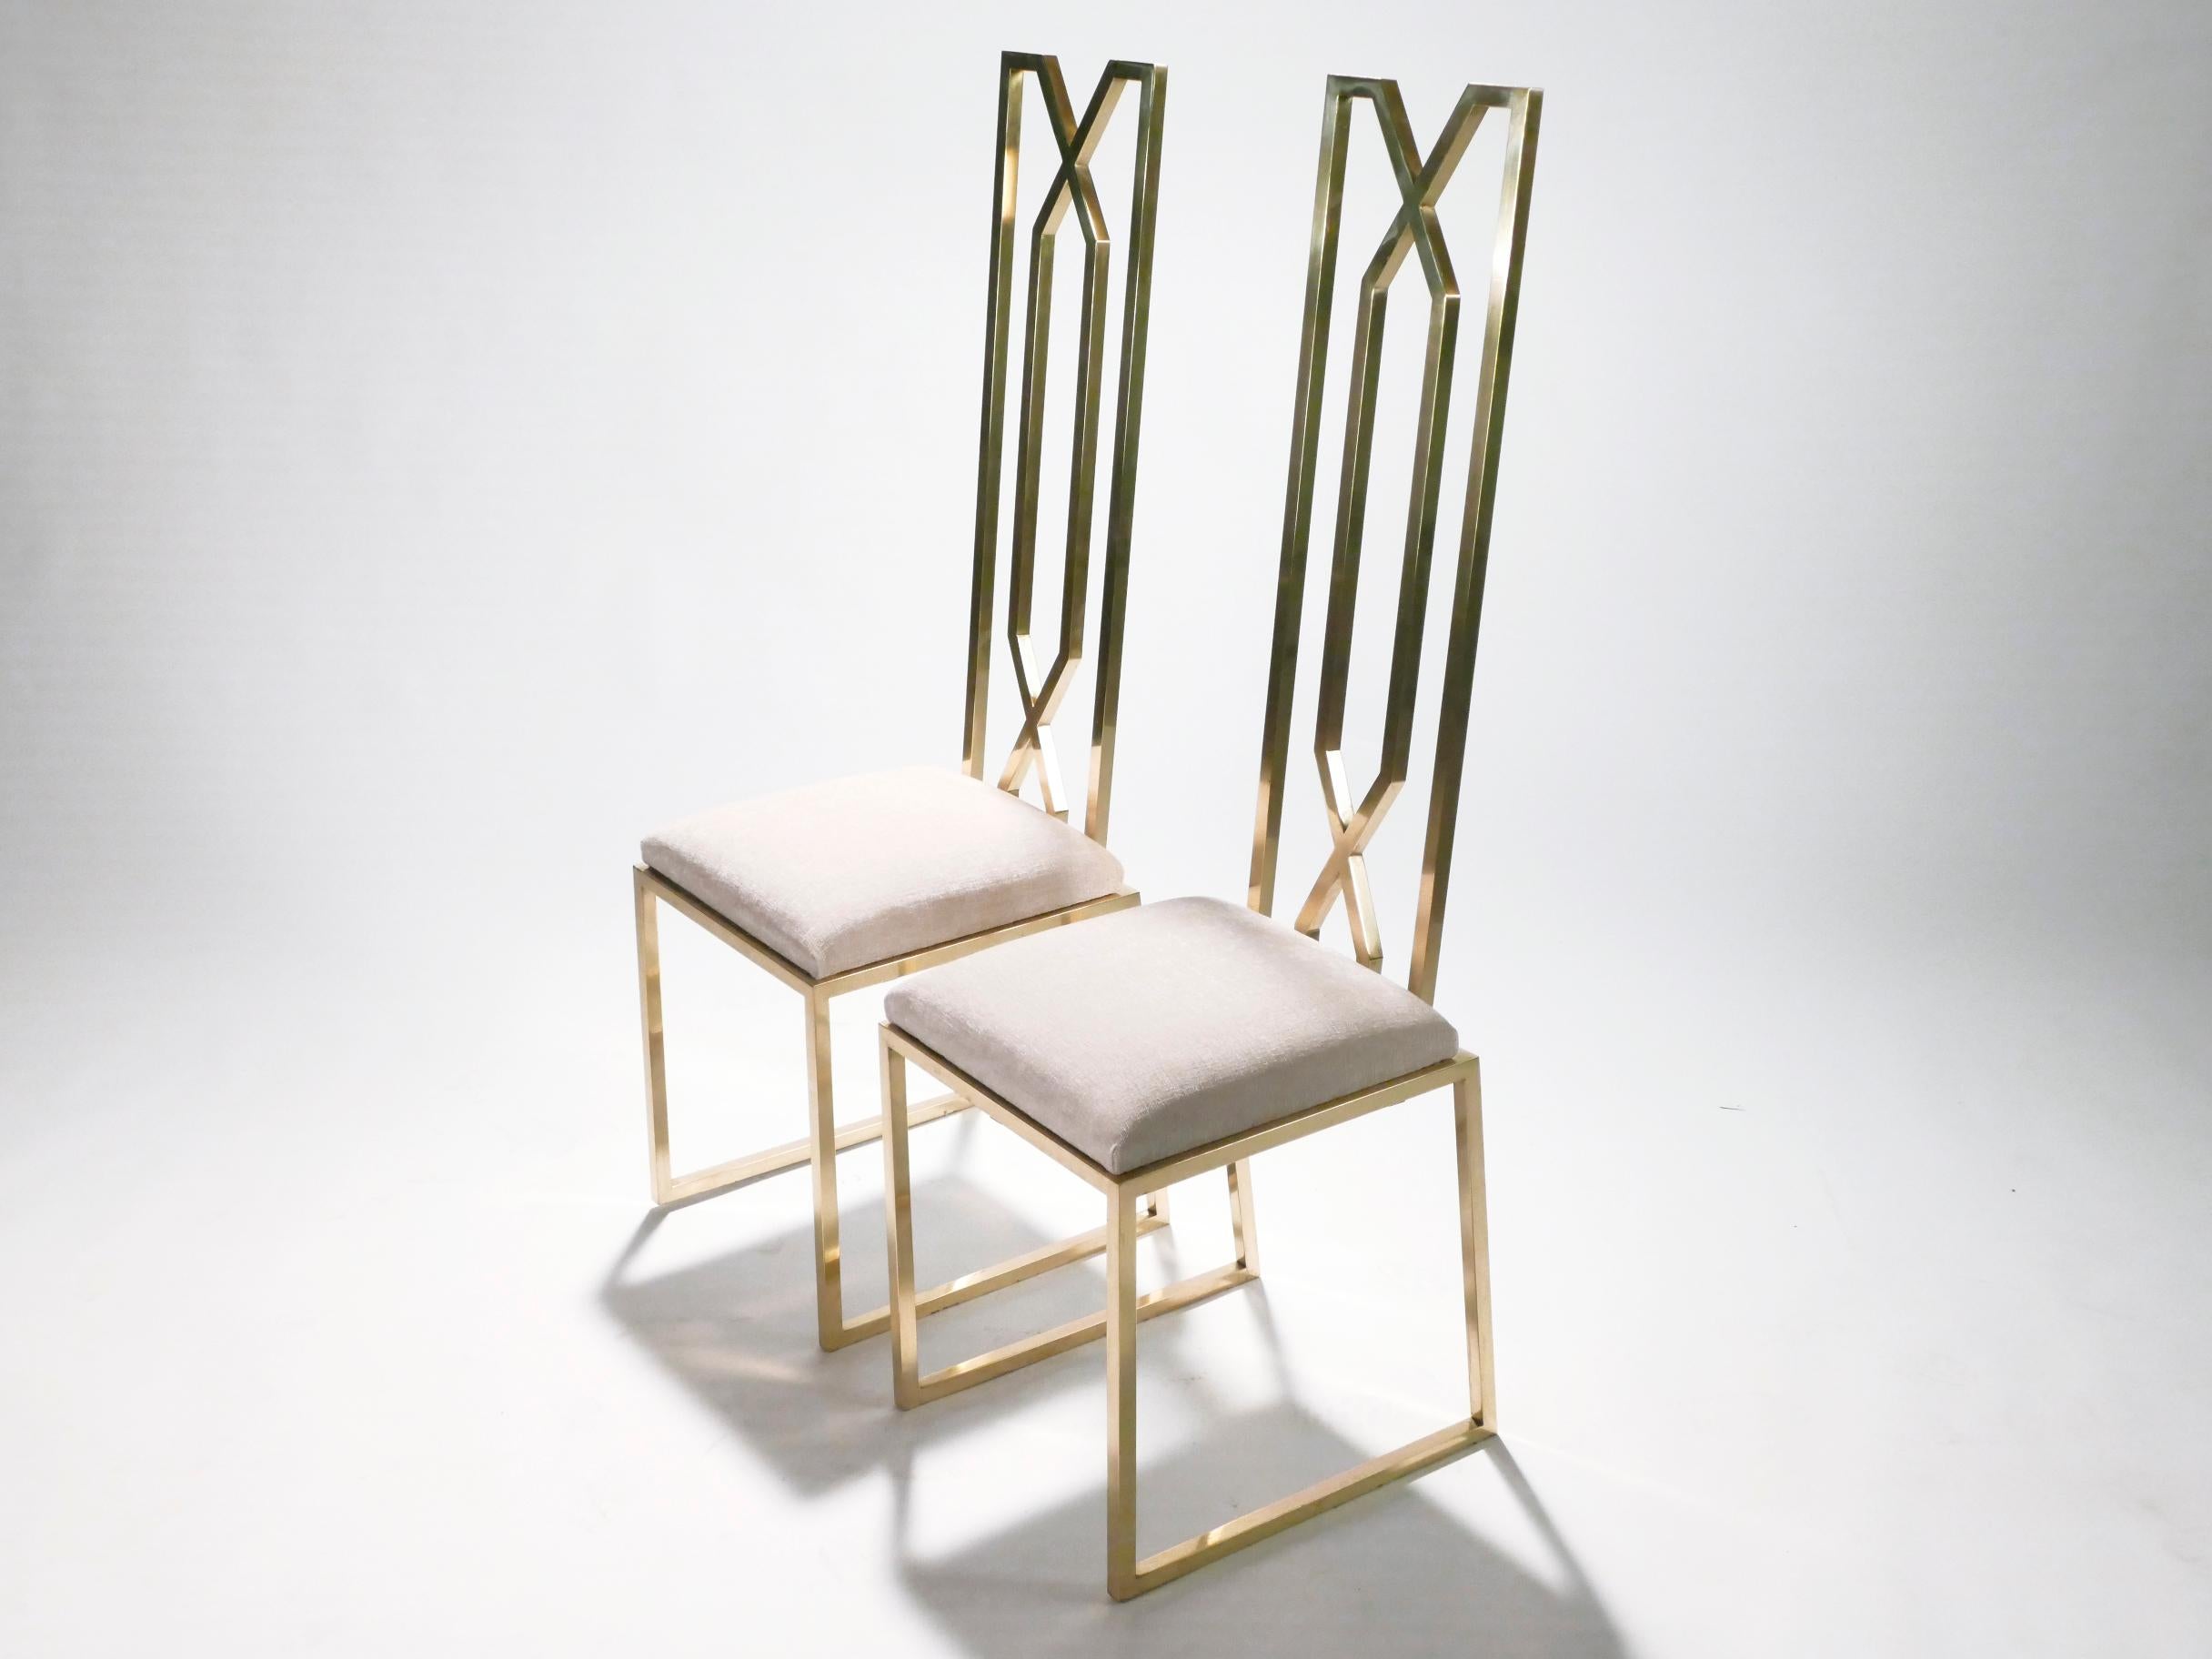 Hollywood Regency Rare Pair of Chairs by Willy Rizzo for Maison Jansen, 1970s